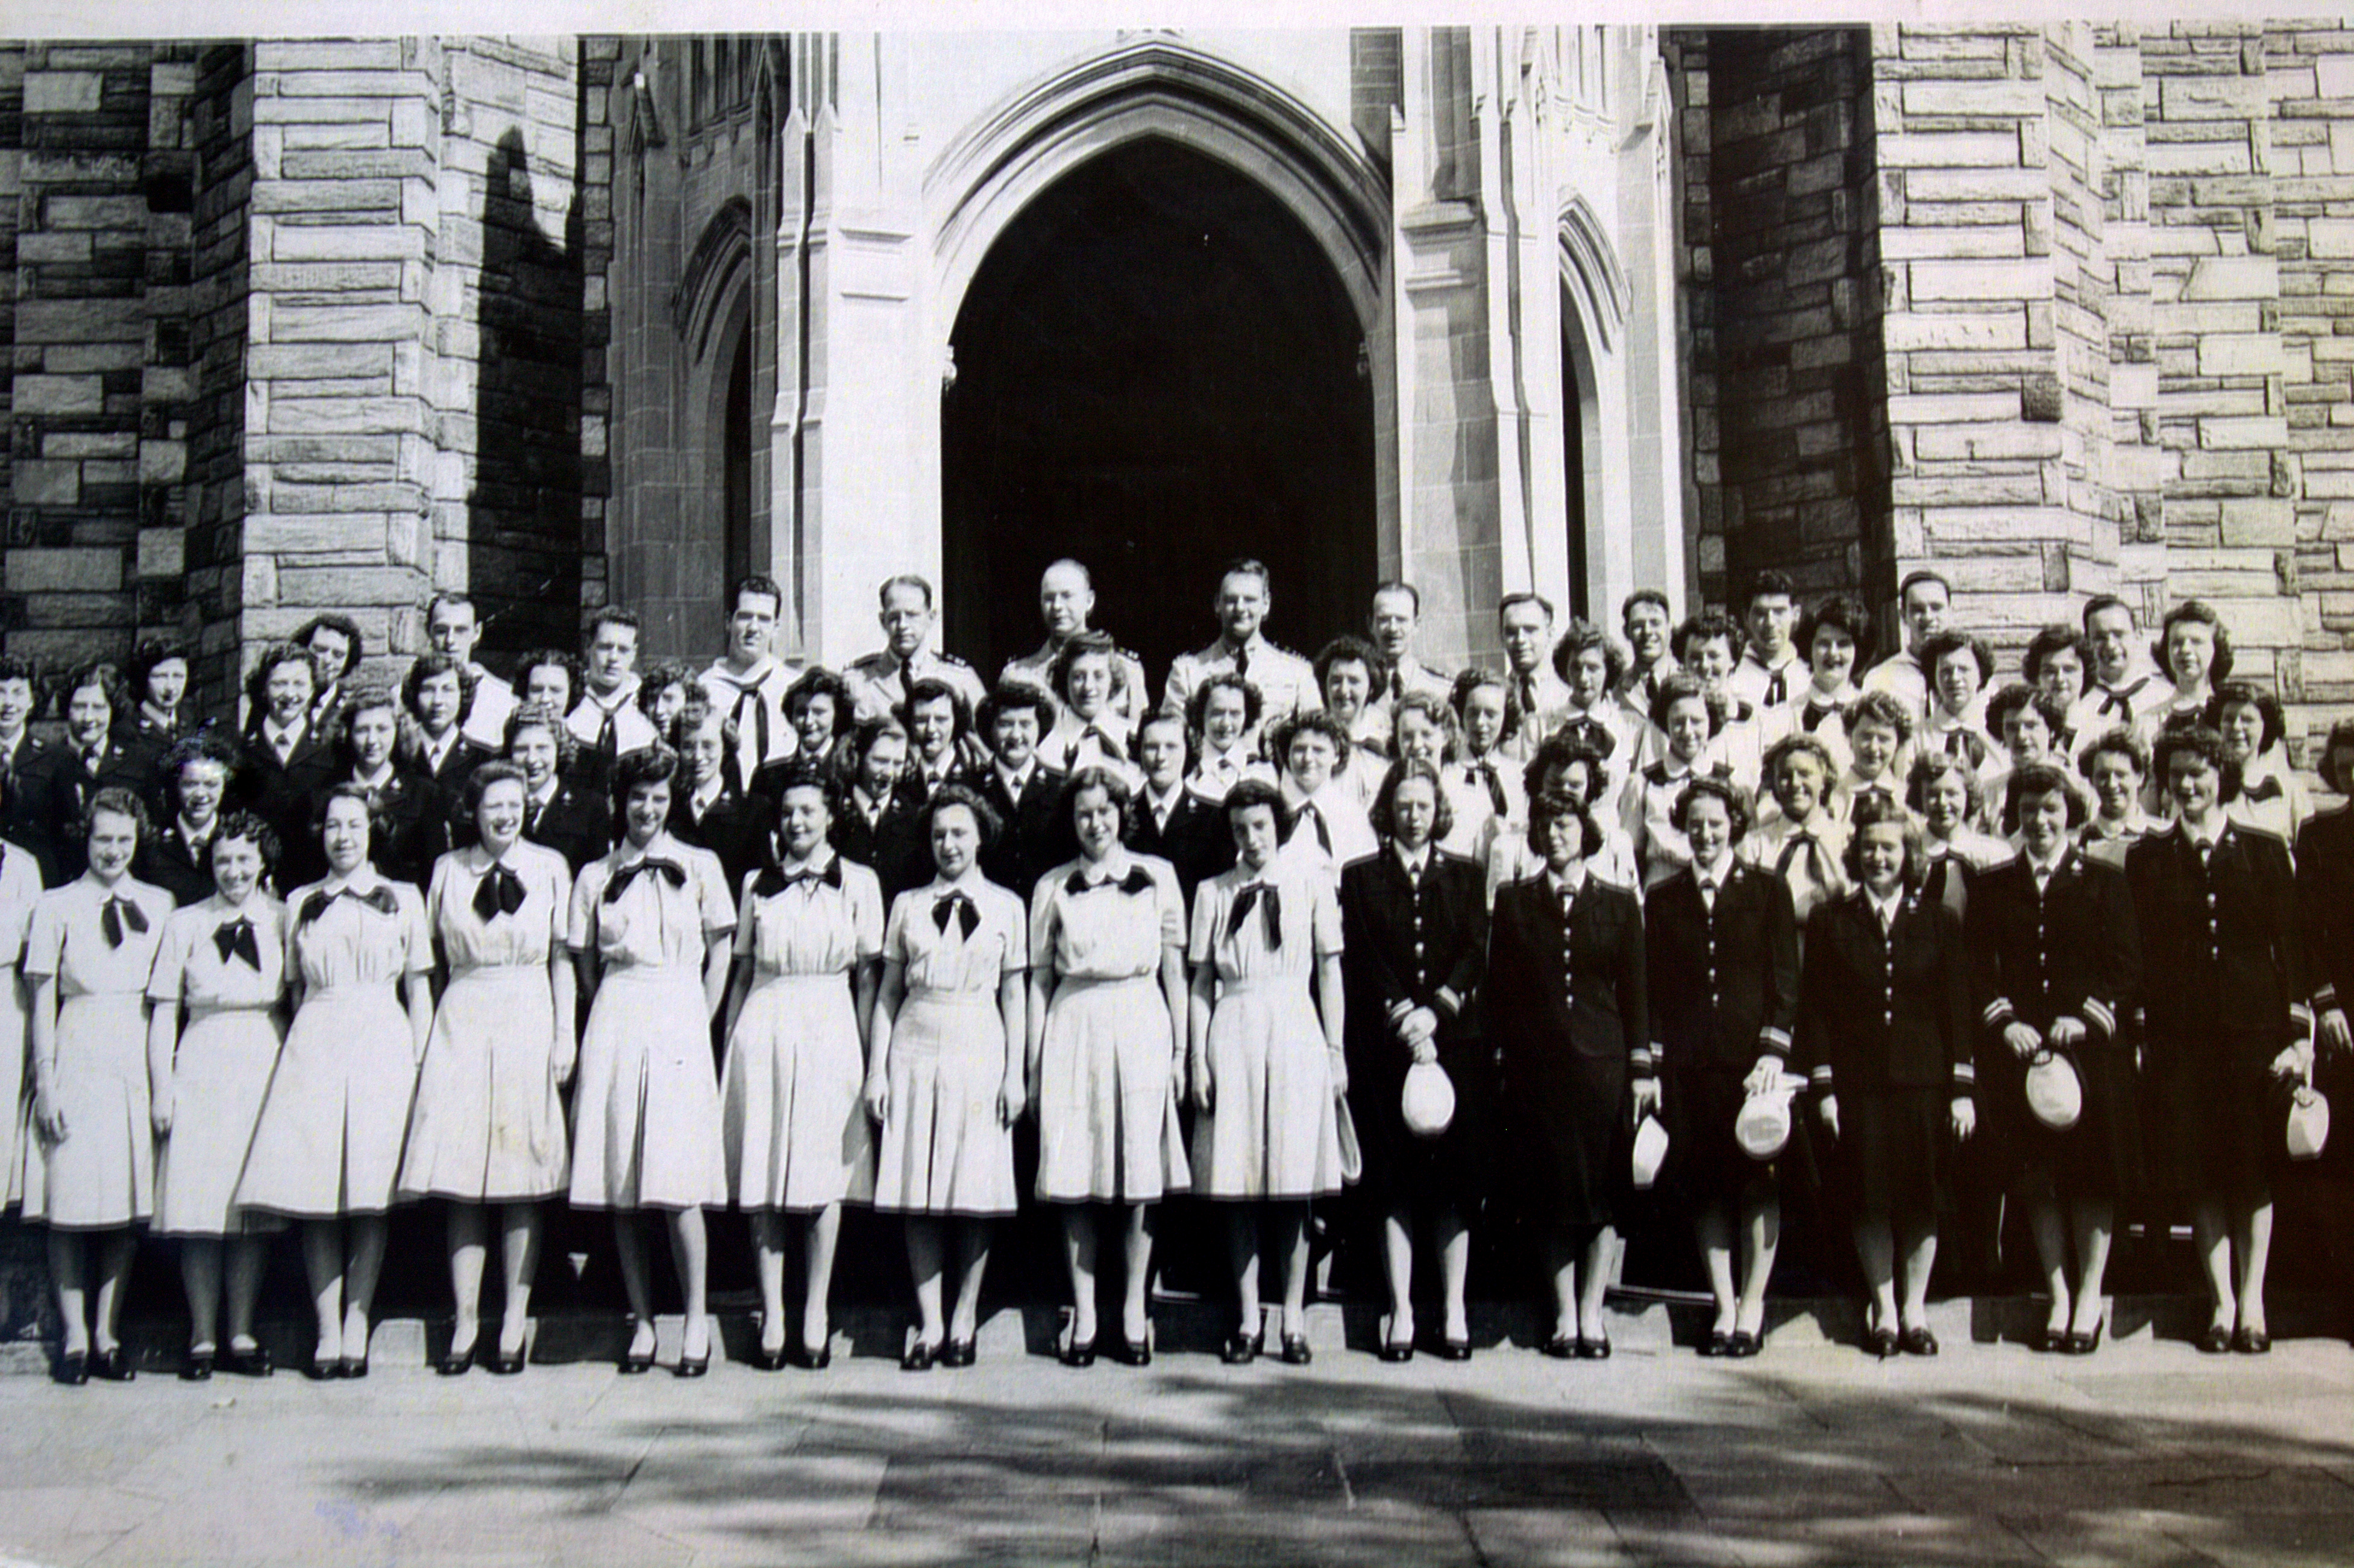 Parsons' class of codebreakers at the Naval Communication Annex, part of the former Mount Vernon Seminary in Washington, DC. (Julia Parsons)